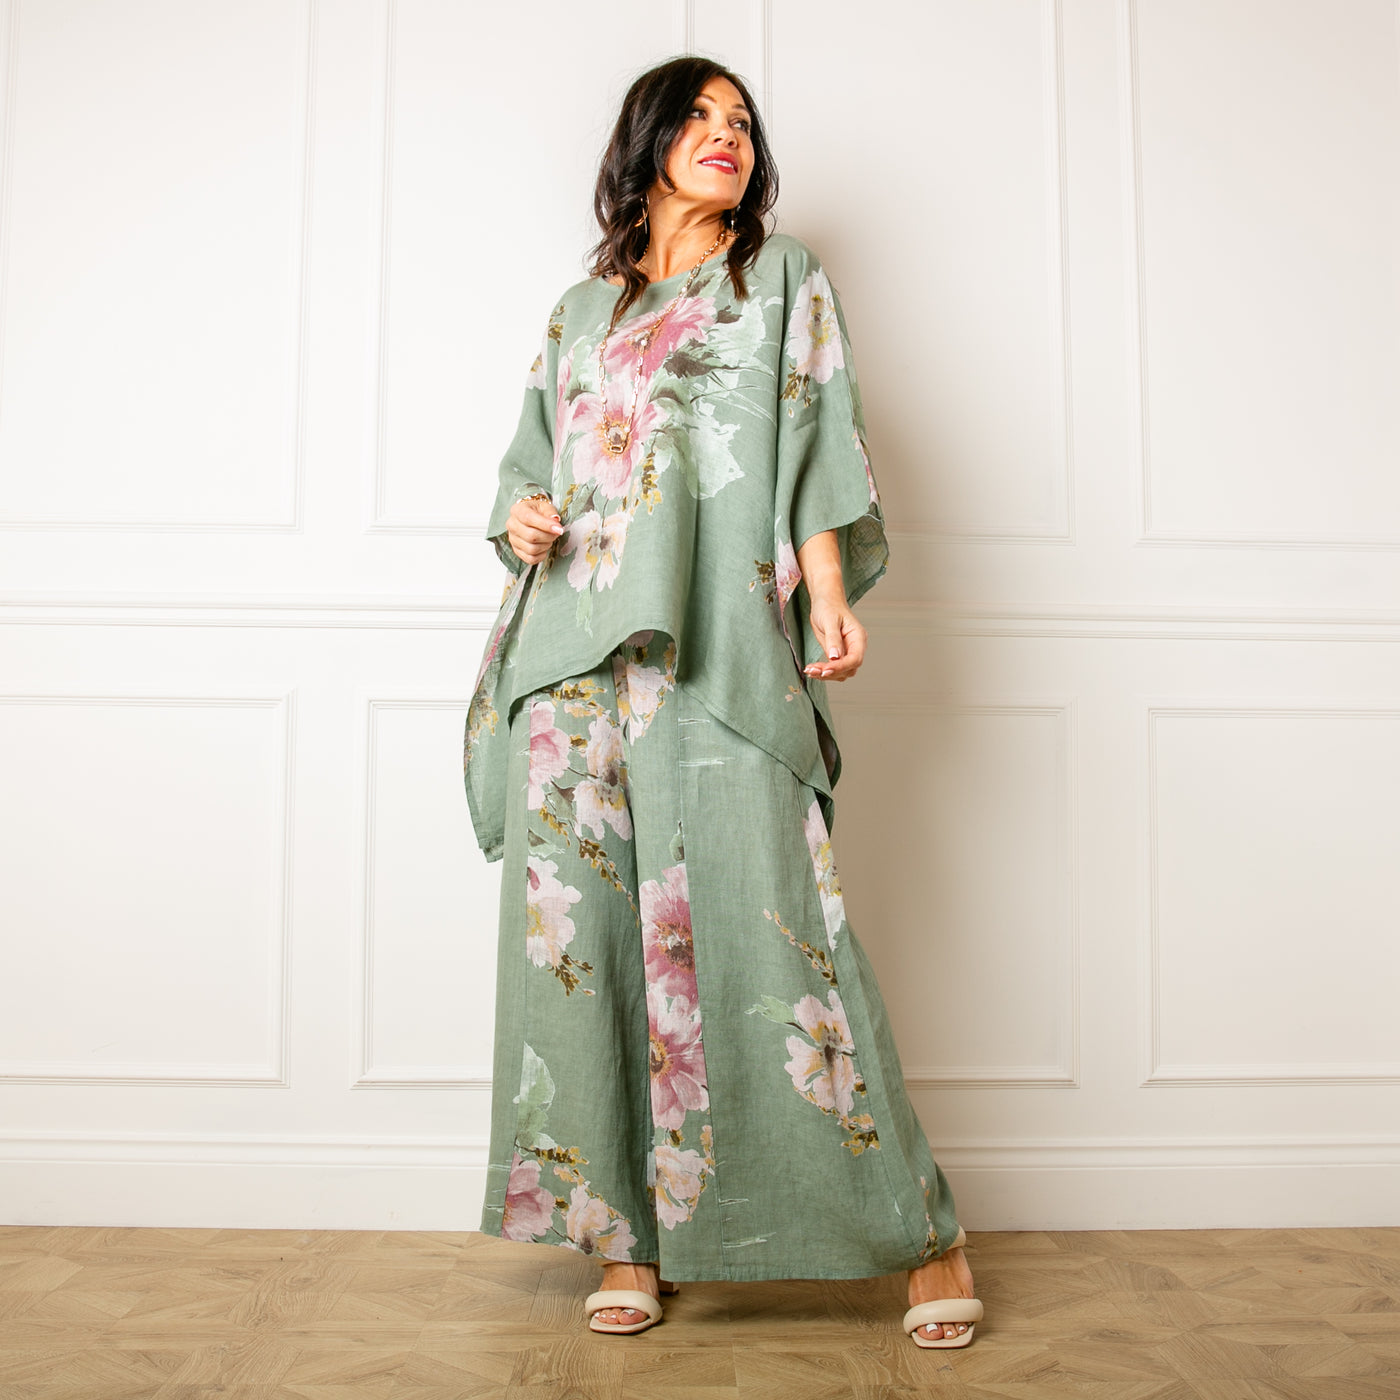 The sage green Bouquet Print Linen Top which is also available as a linen trouser set